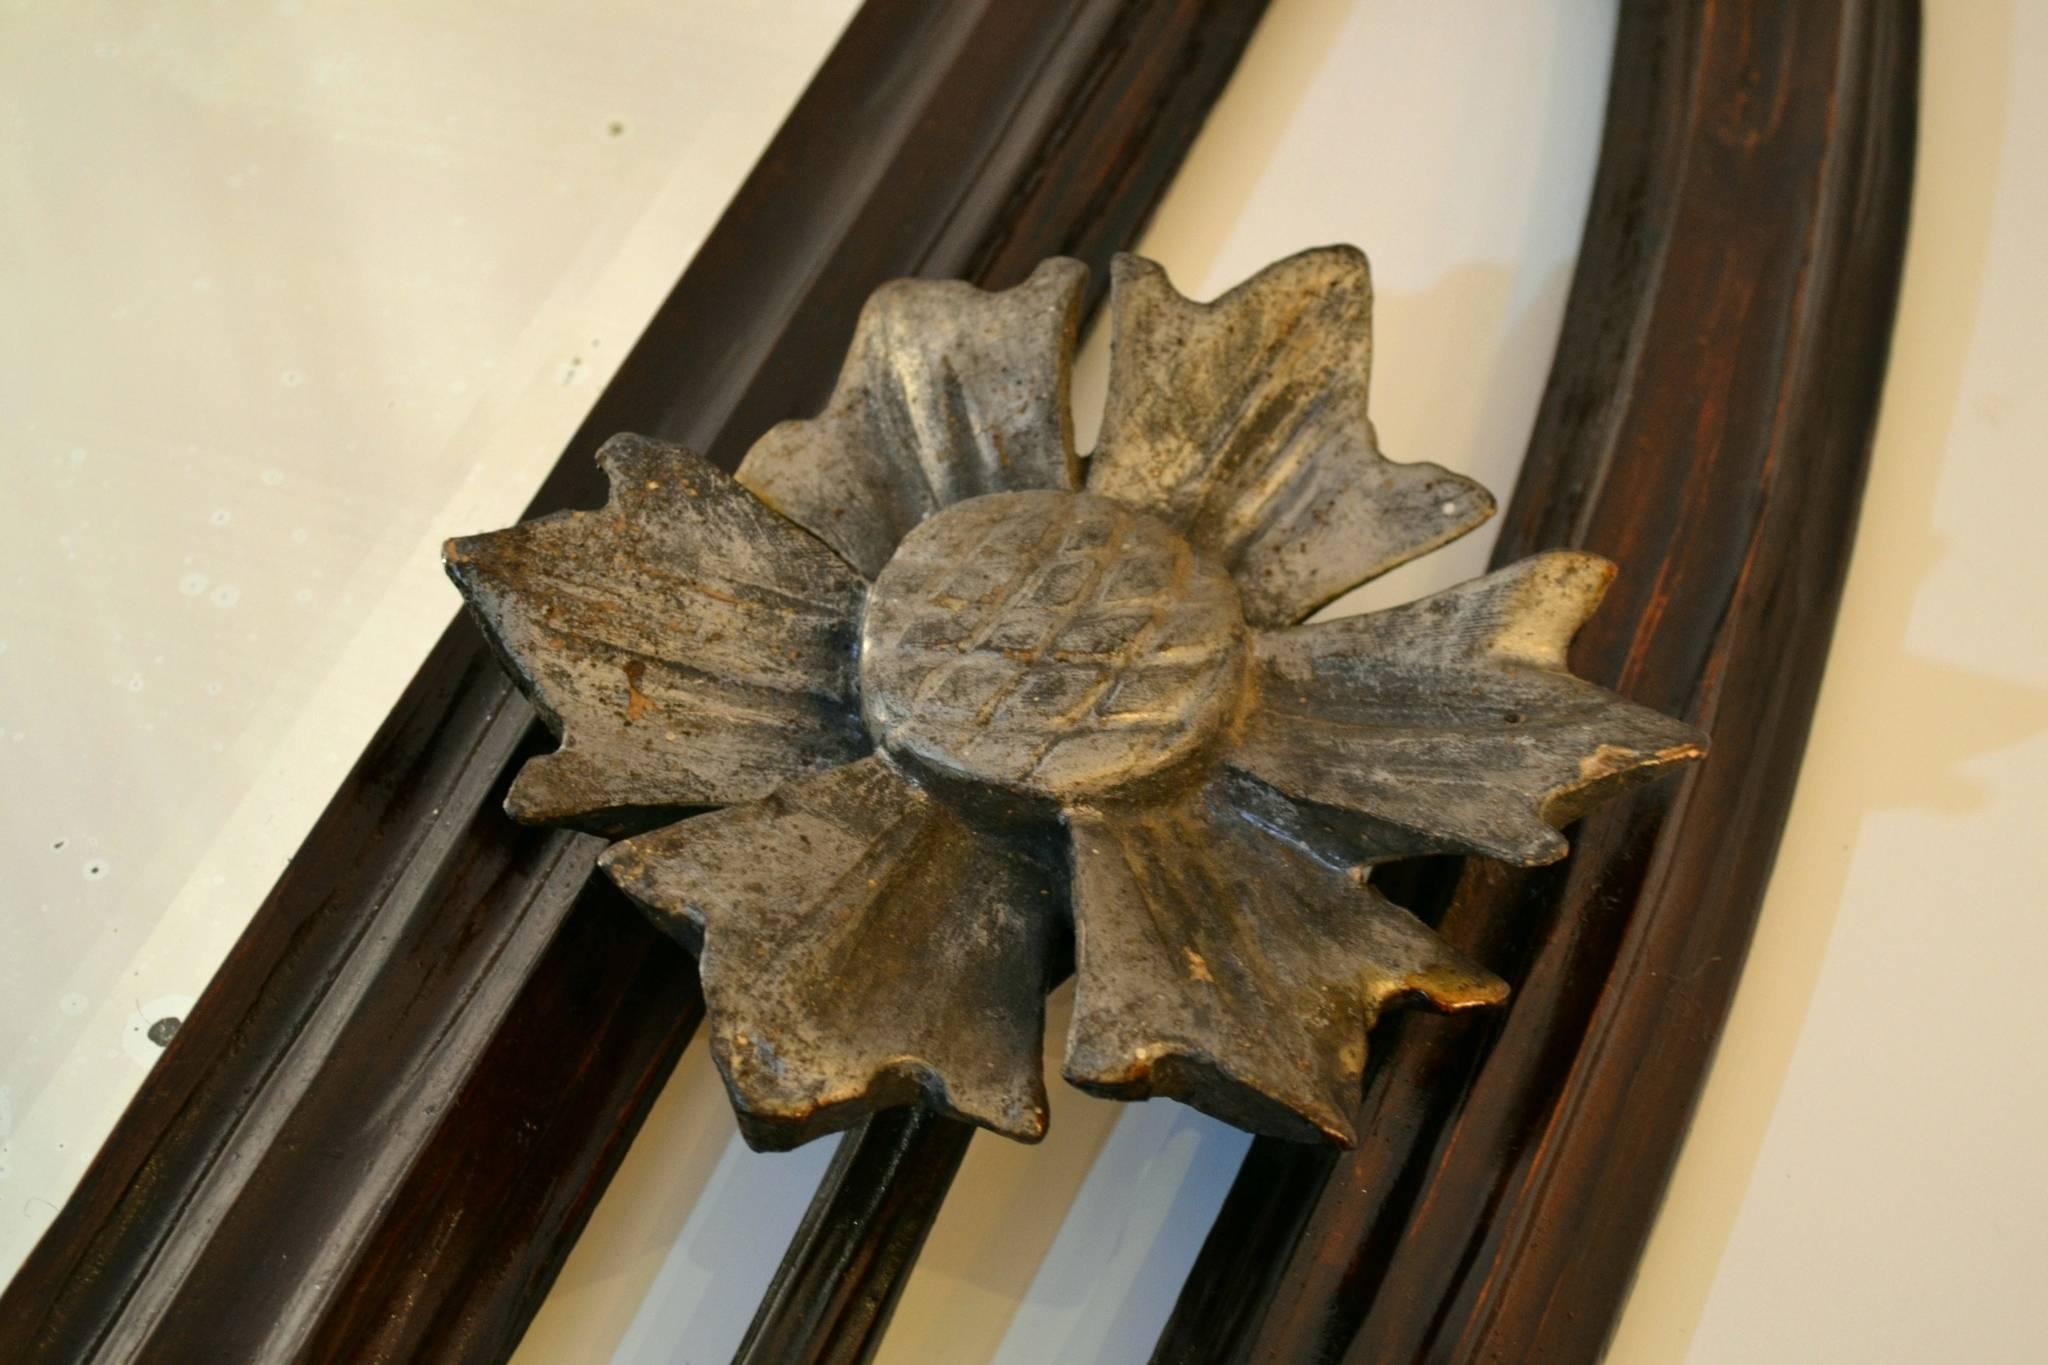 Hand-carved mirror in tulip wood with silver gilding. Decorated with carved thistles, which is the national flower of Scotland from the Art Nouveau period, circa 1900. Reminiscent of the style of Macintosh and artist Aubrey Beardsley. The mirror